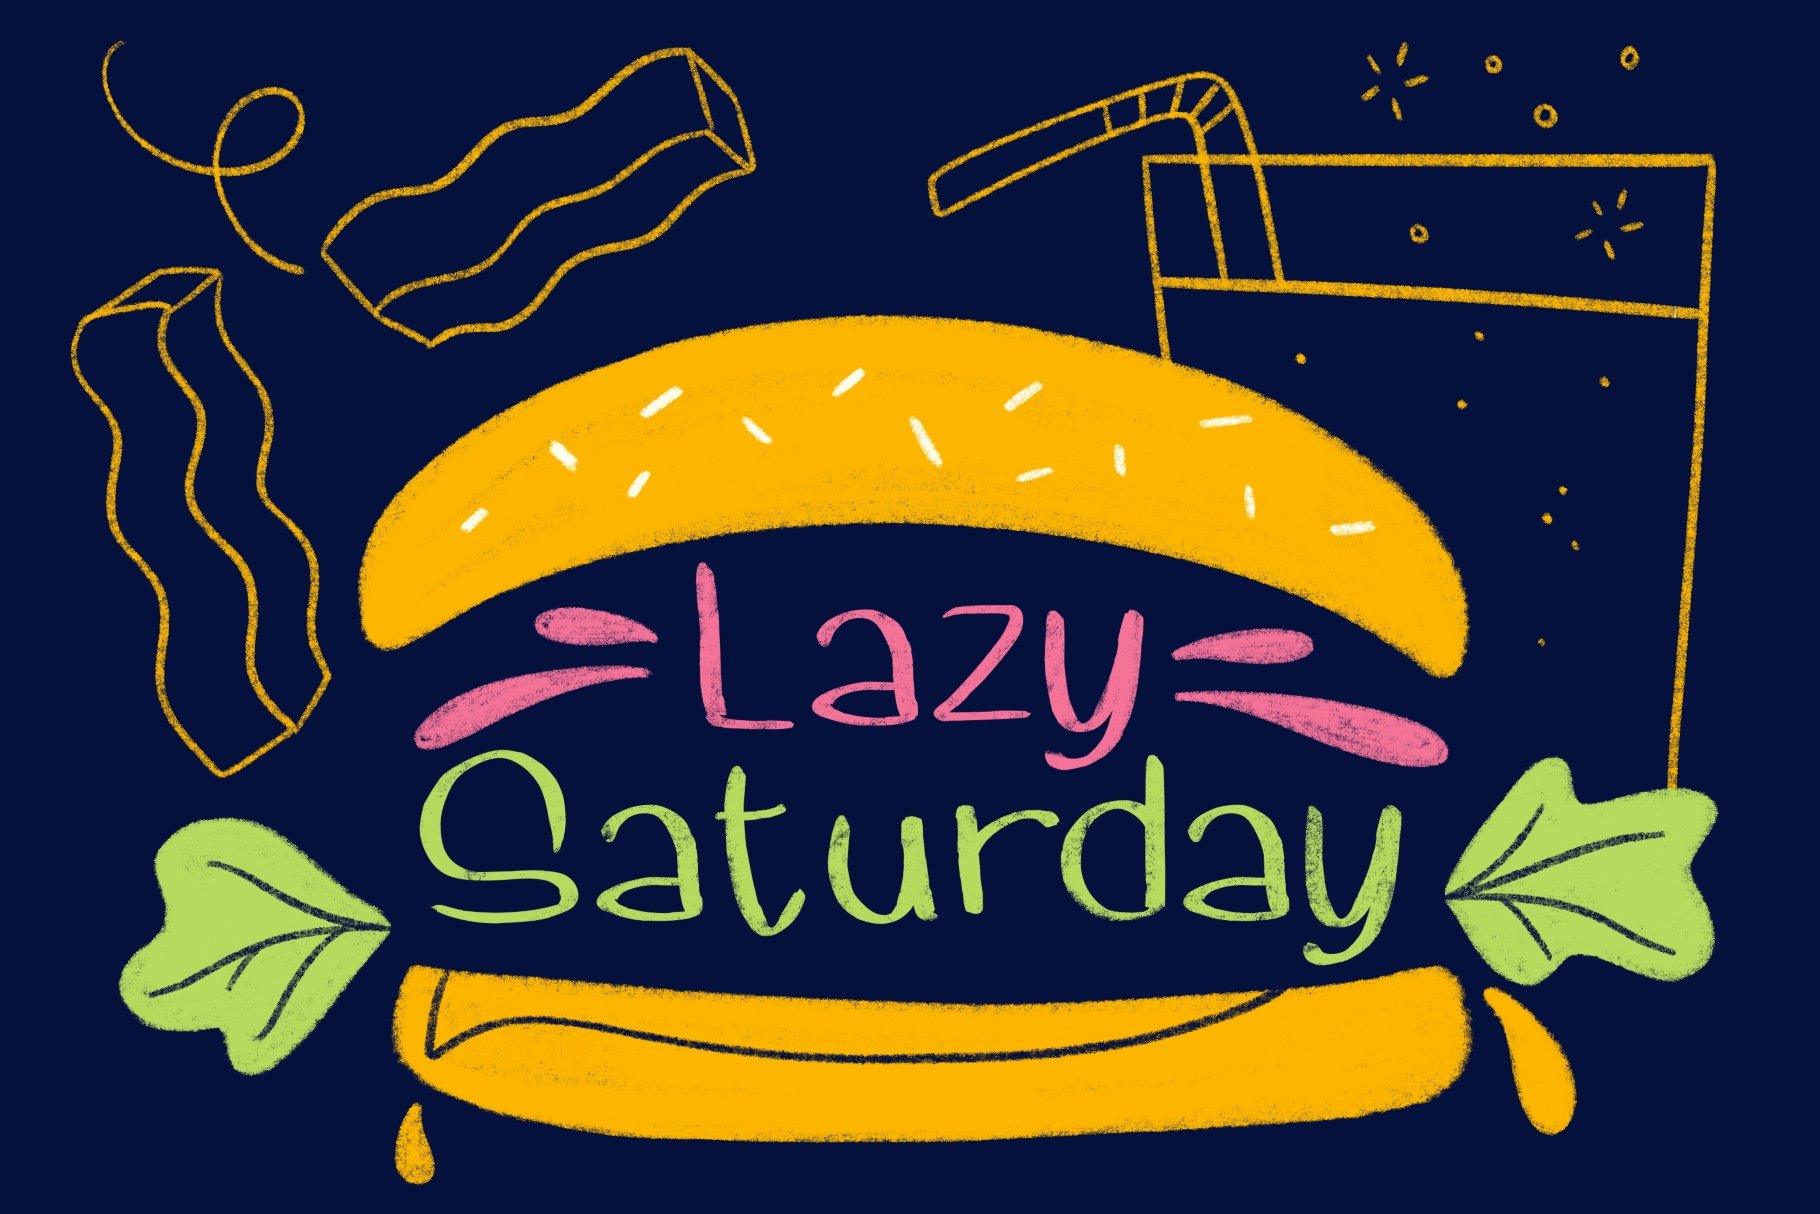 Lazy Saturday font cover image.